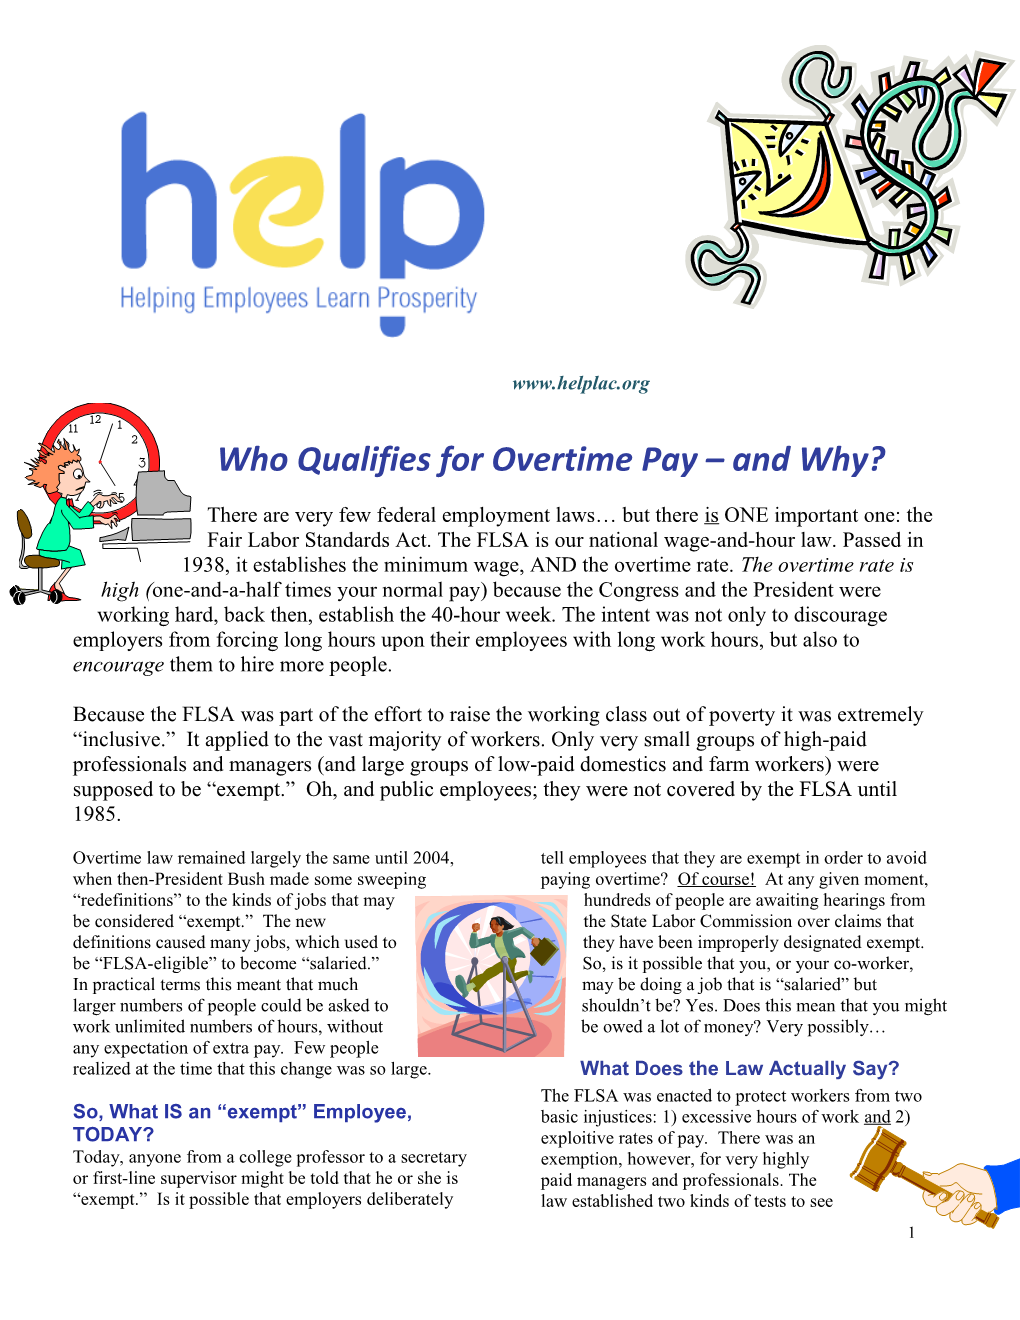 Who Qualifies for Overtime Pay and Why?